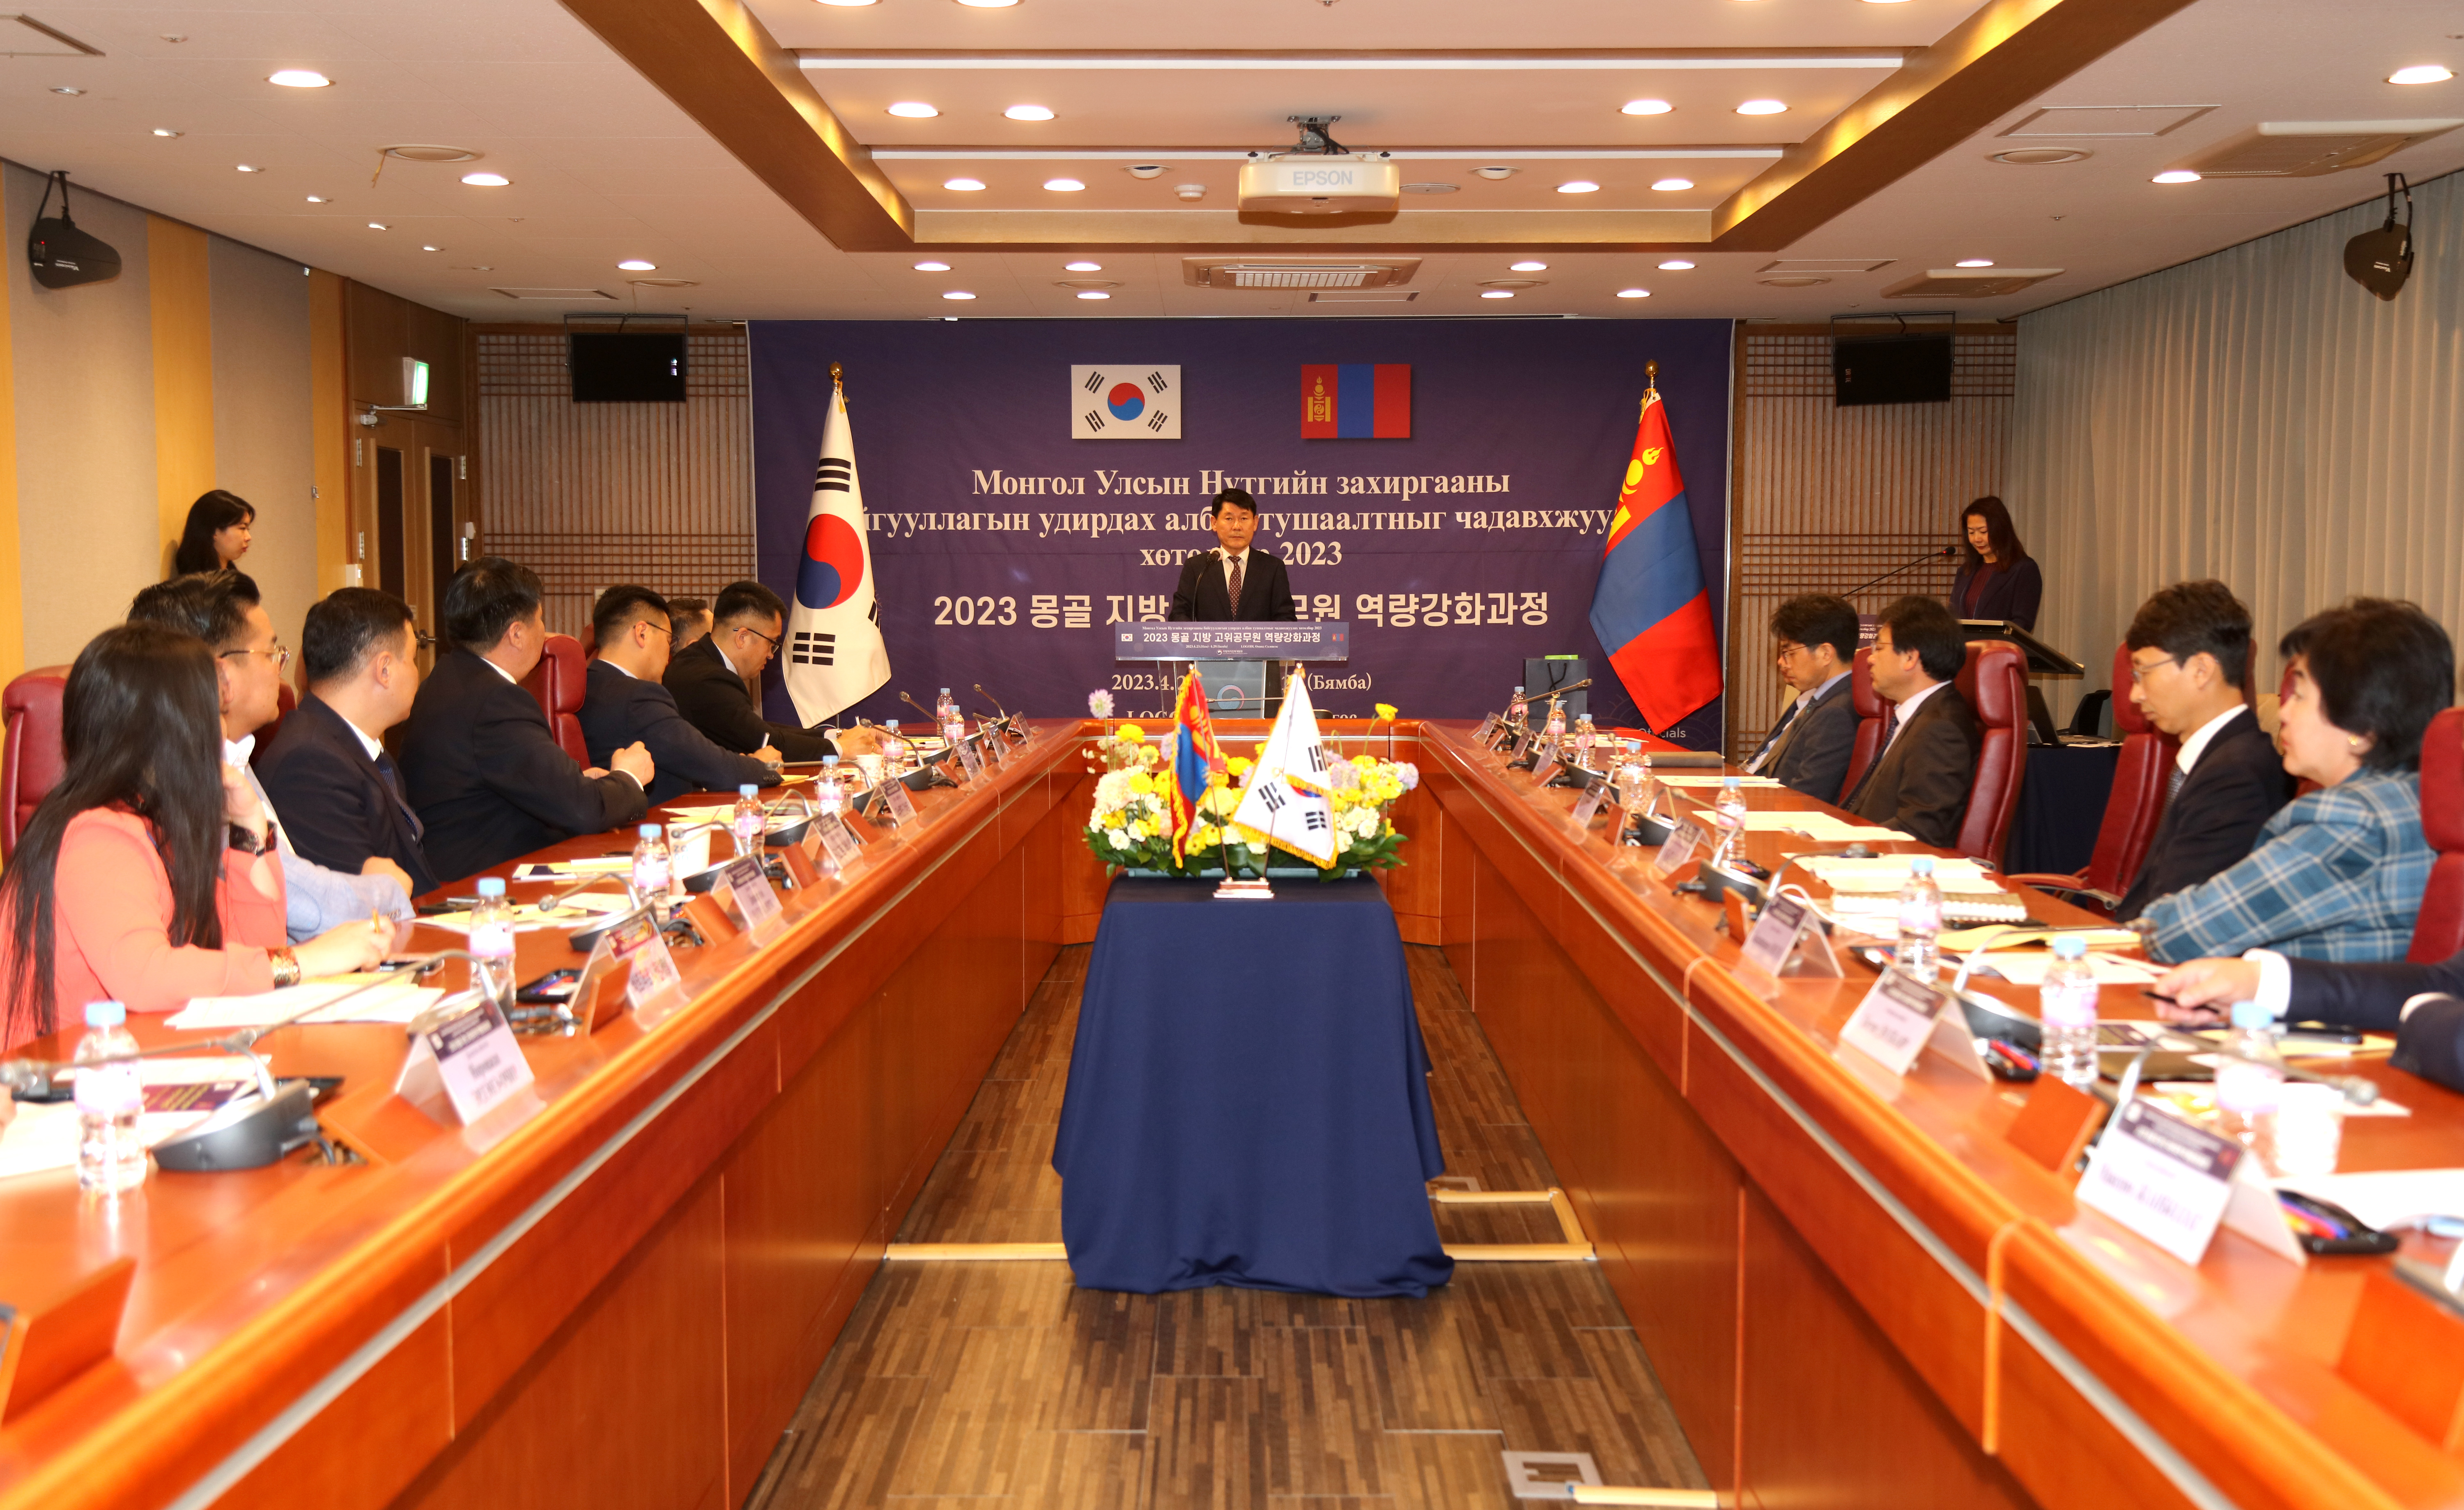 Mongolian Officials Prepare to Improve Public Service by Sharing Korea%26%2339%3Bs Cases. 큰 이미지[마우스 클릭 시 창닫기]